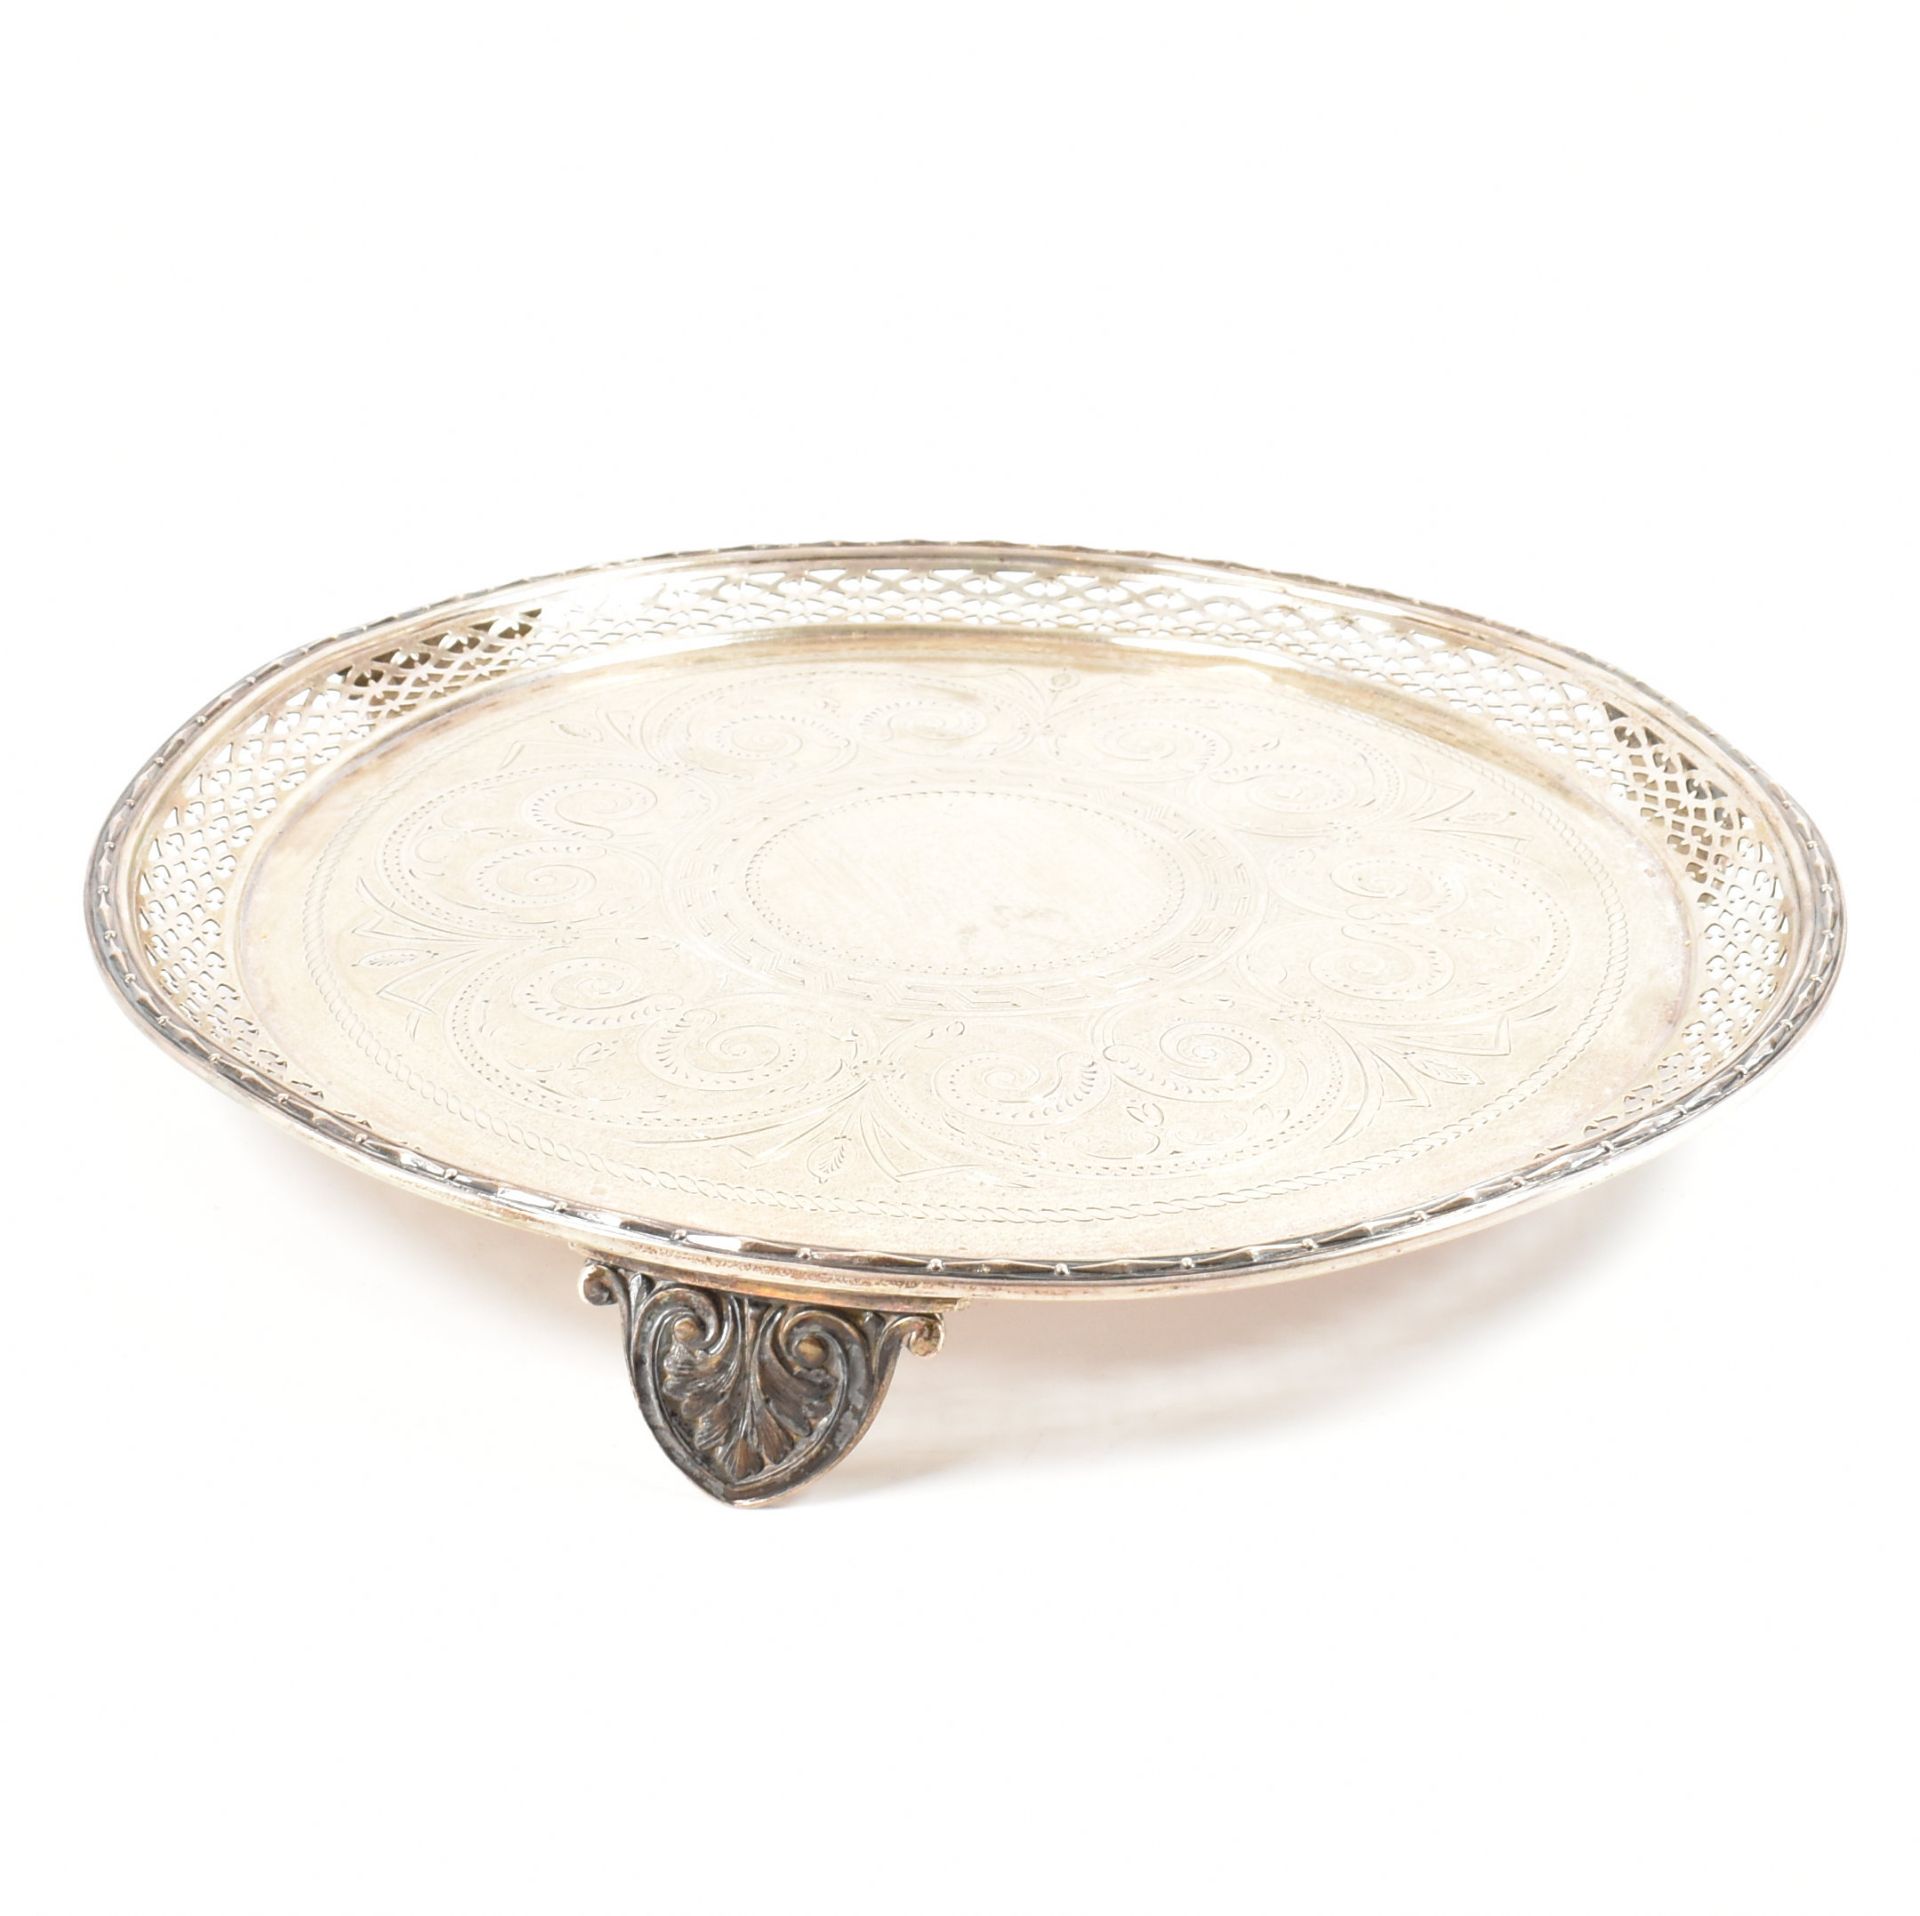 VICTORIAN HALLMARKED ELKINGTON & CO SILVER FOOTED TRAY - Image 2 of 5